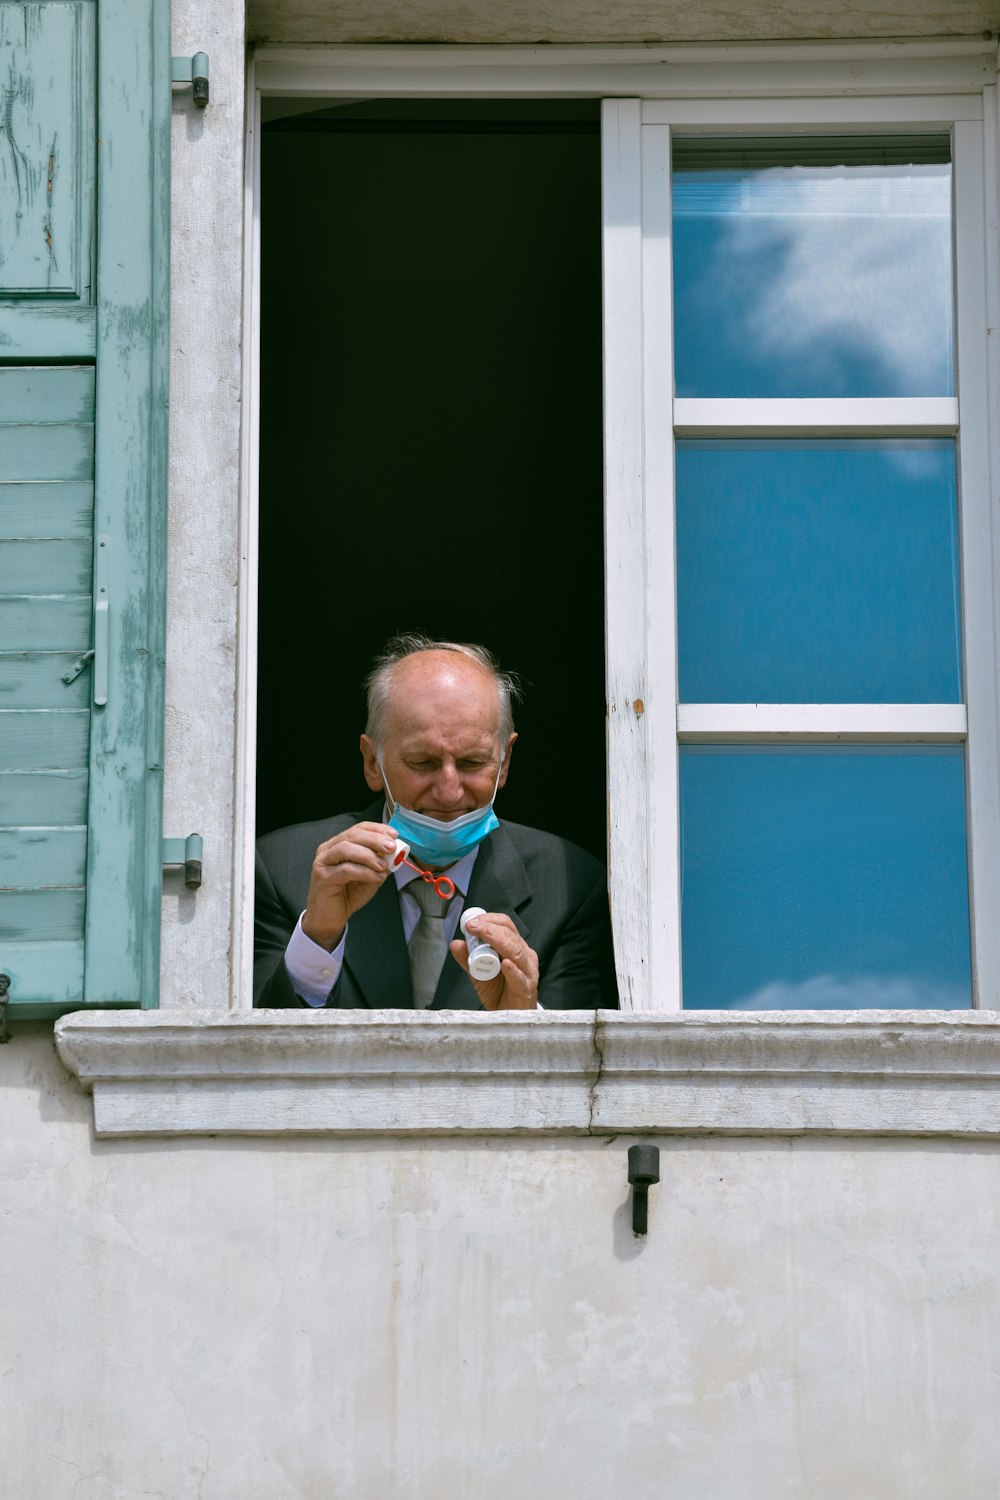 a man in a suit and tie looking out a window